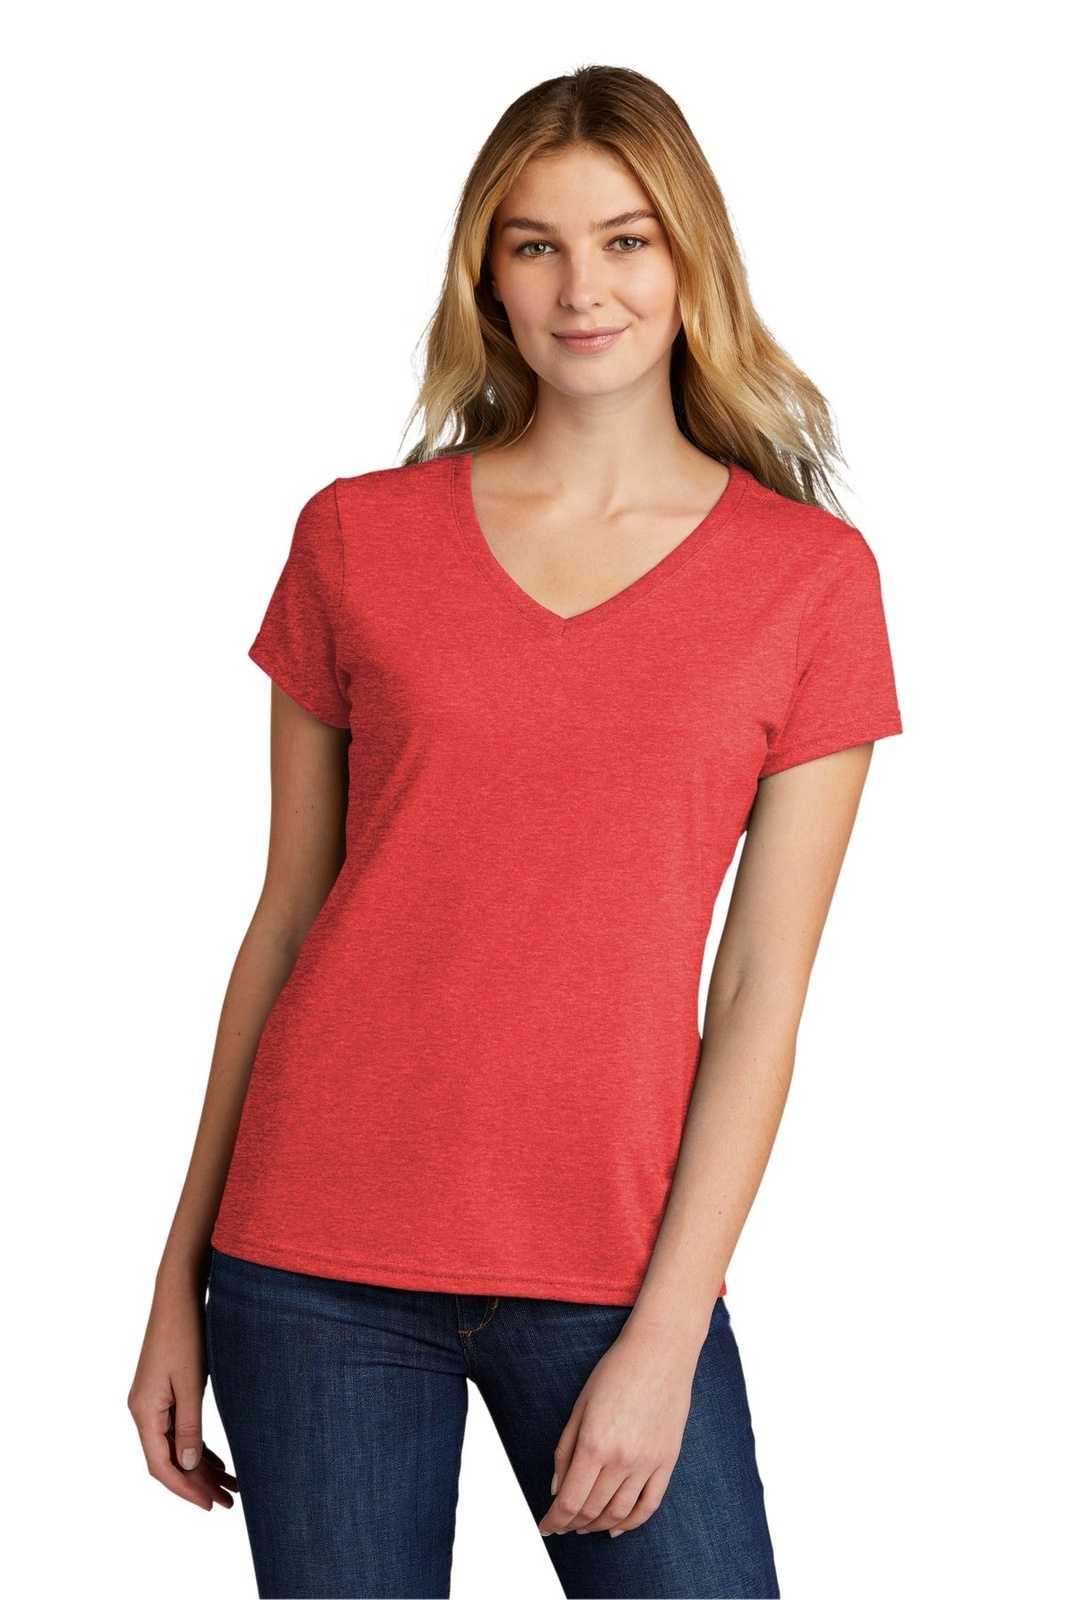 Port & Company LPC330V Ladies Tri-Blend V-Neck Tee - Bright Red Heather - HIT a Double - 1